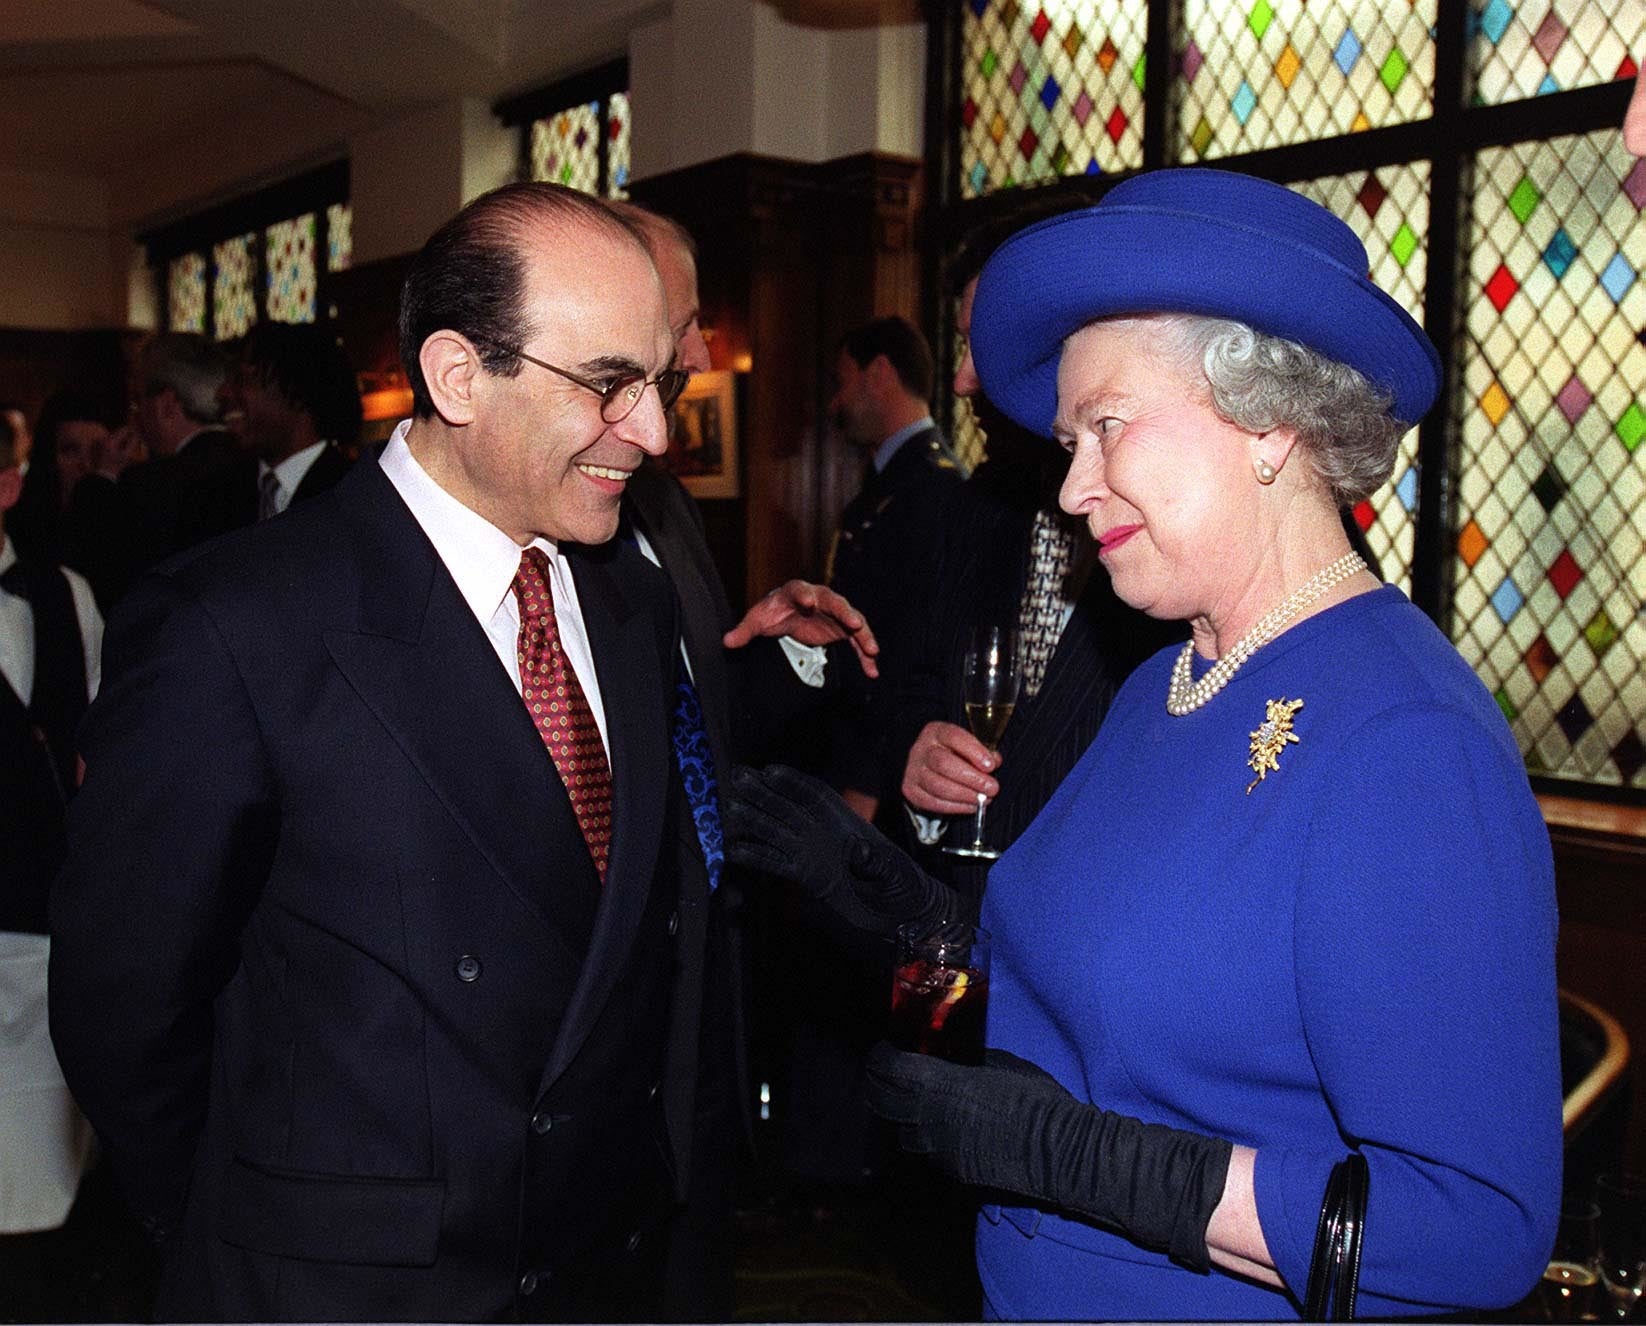 Sir David Suchet with the Queen during her visit to the Almeida Theatre in London (PA)